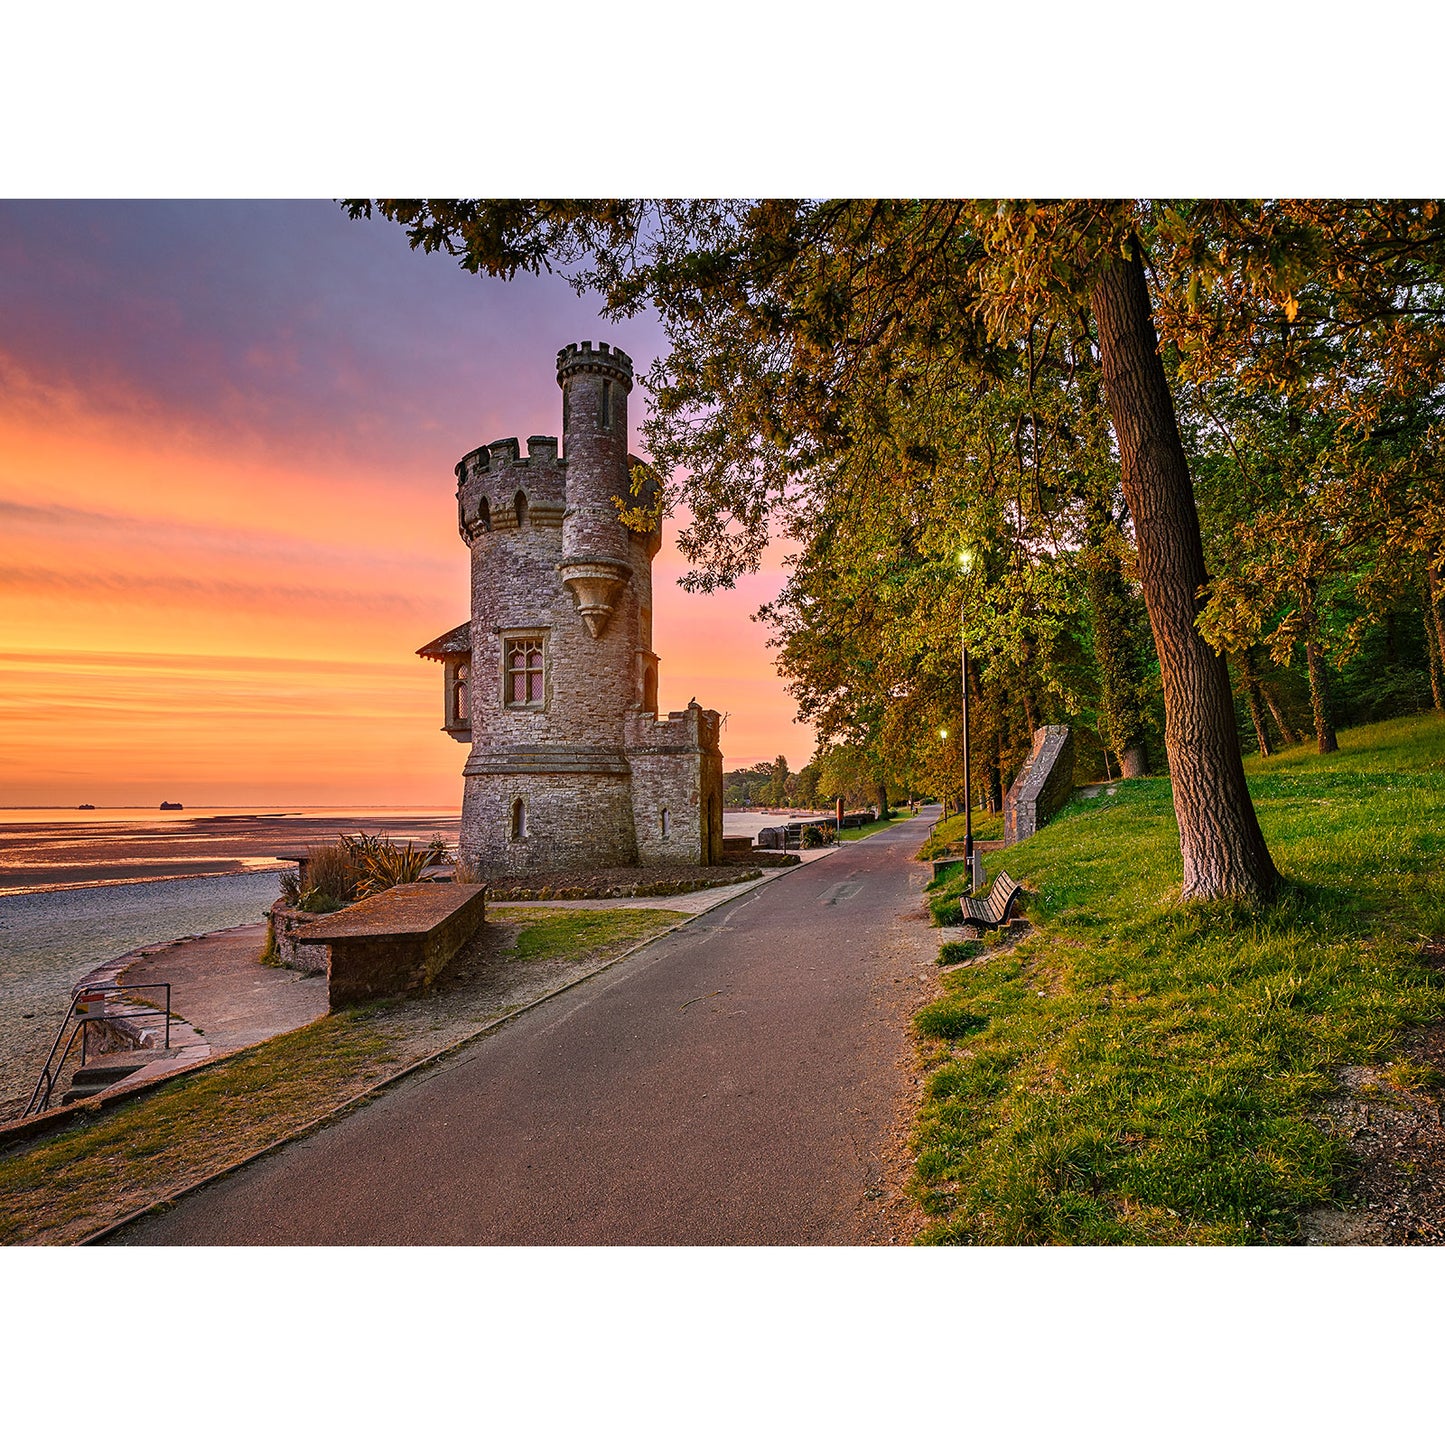 Historic Appley Tower by a path at sunrise captured by Available Light Photography.